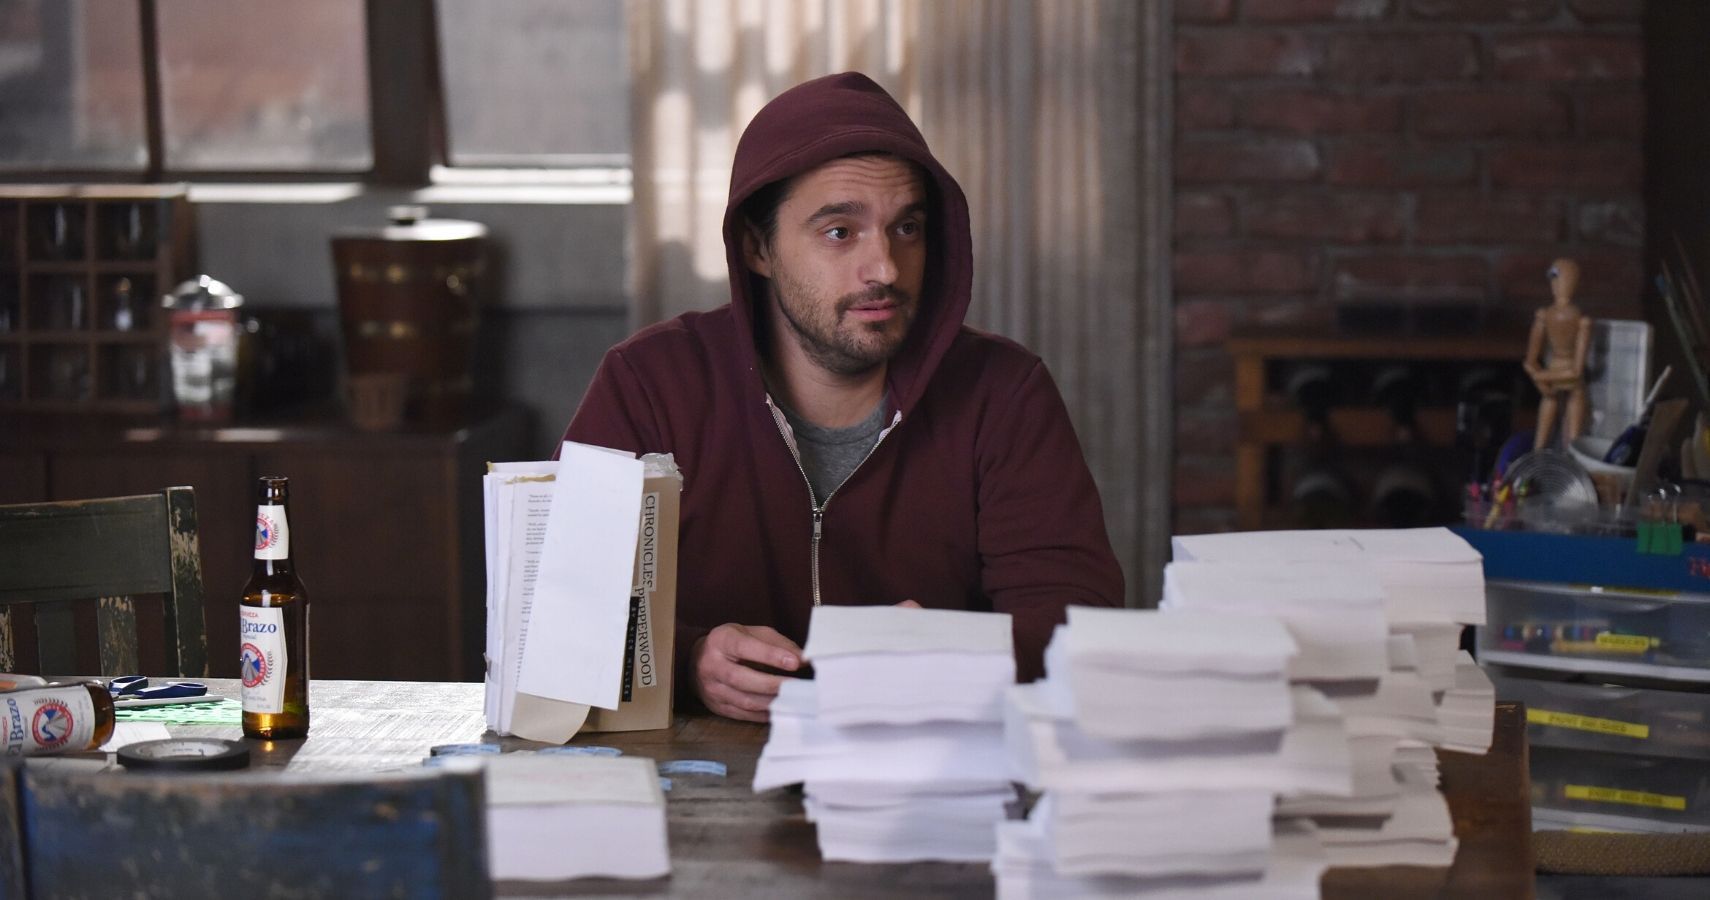 Nick Miller's 7 Best And 7 Worst Episodes Of New Girl